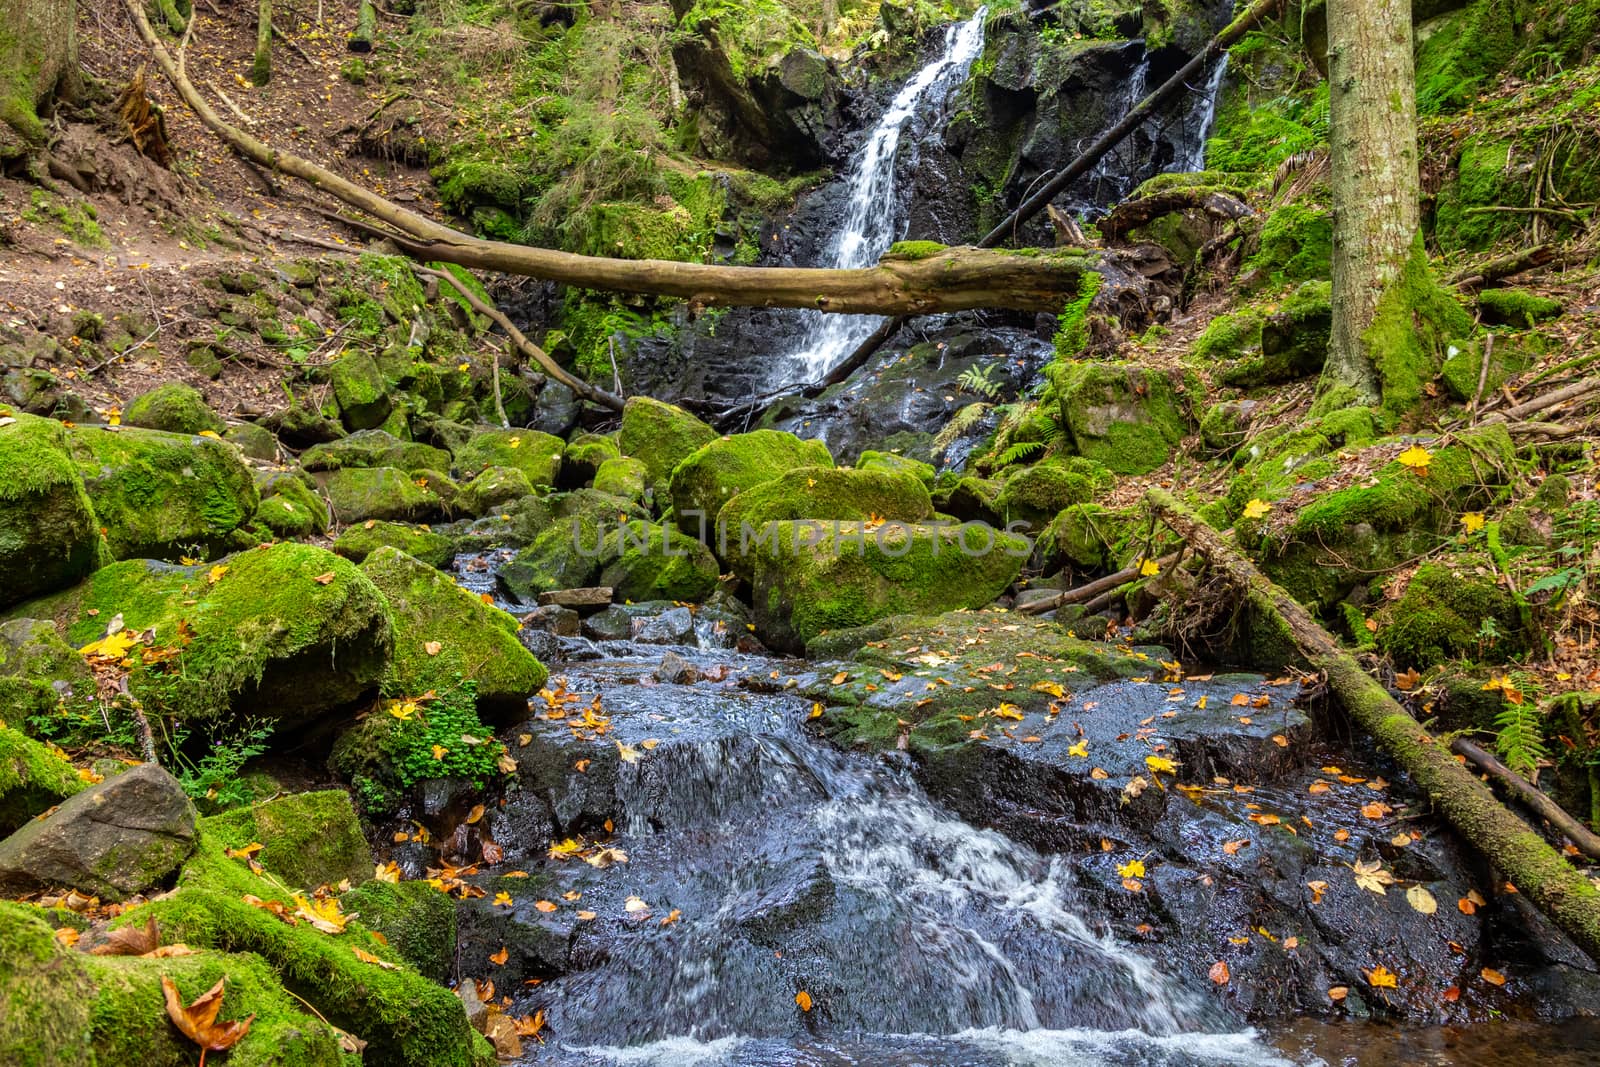 Stream and waterfall along a trail nearby St. Blasien by reinerc